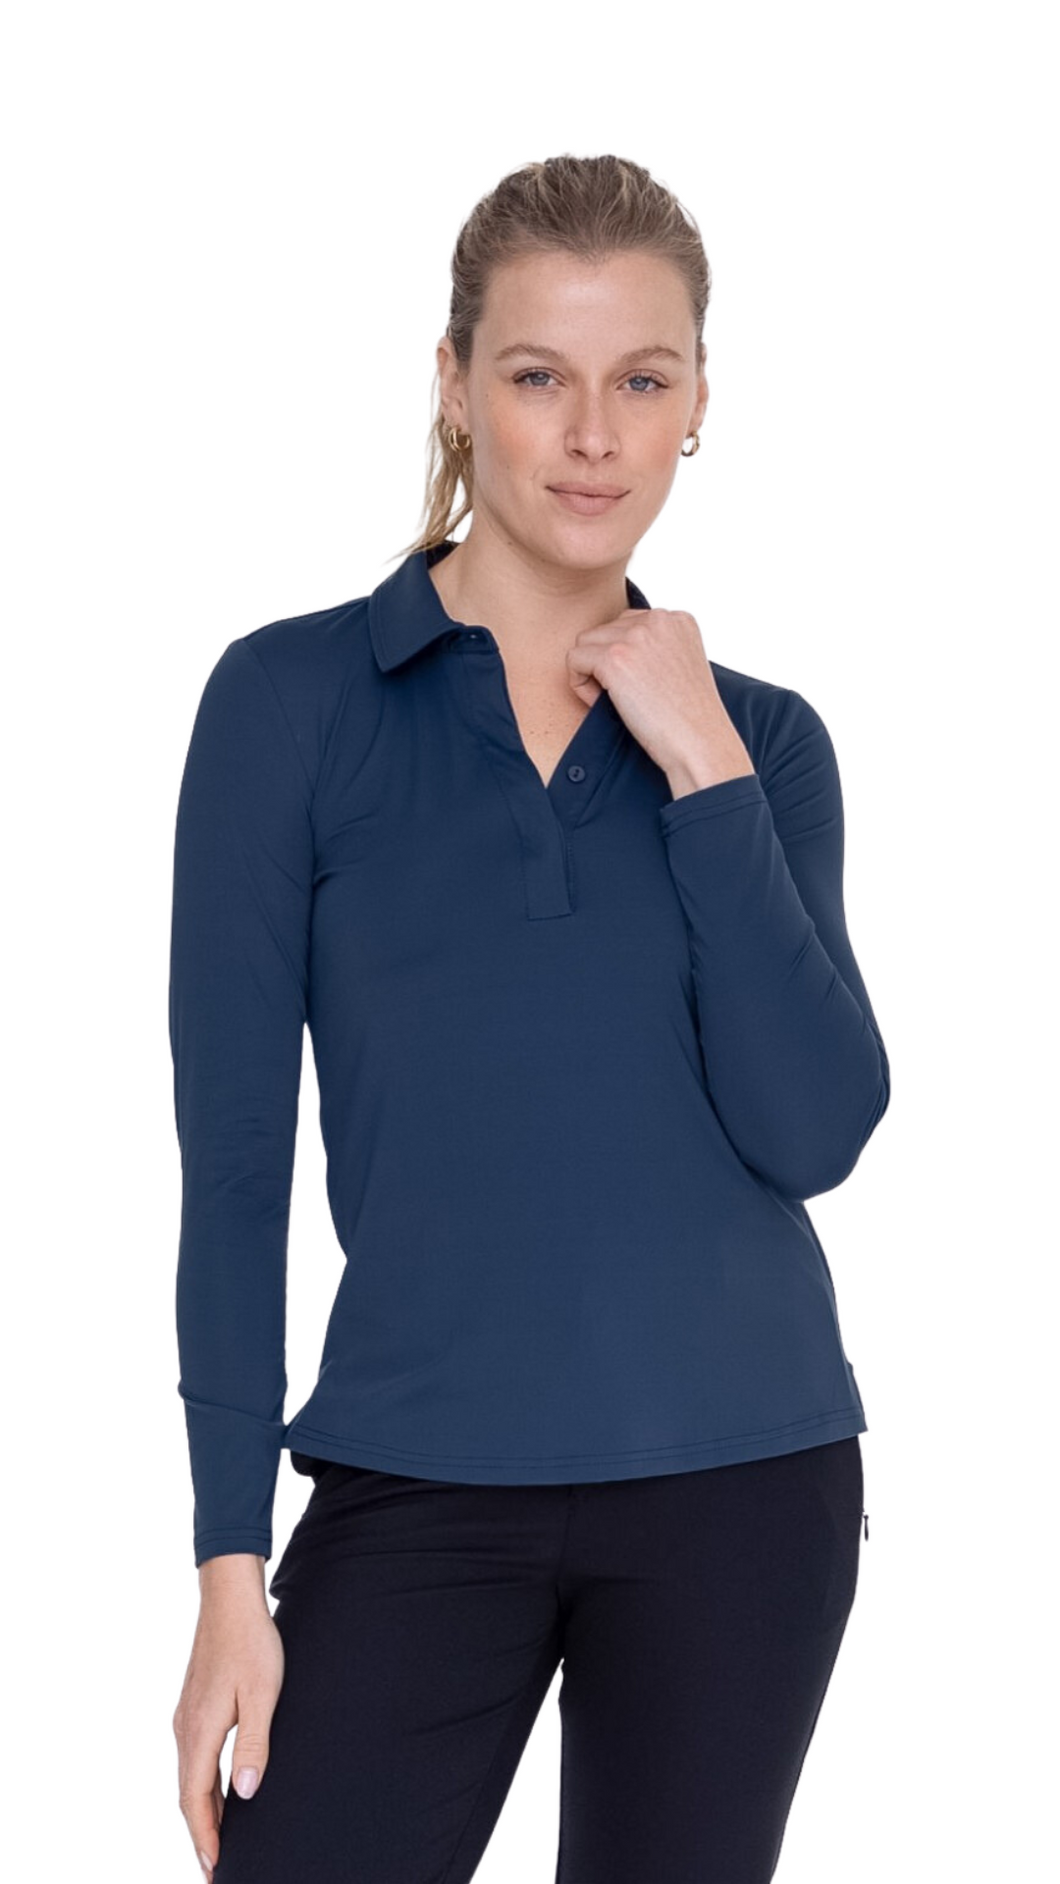 FREE MB LONG SLEEVES ACTIVE POLO NAVY